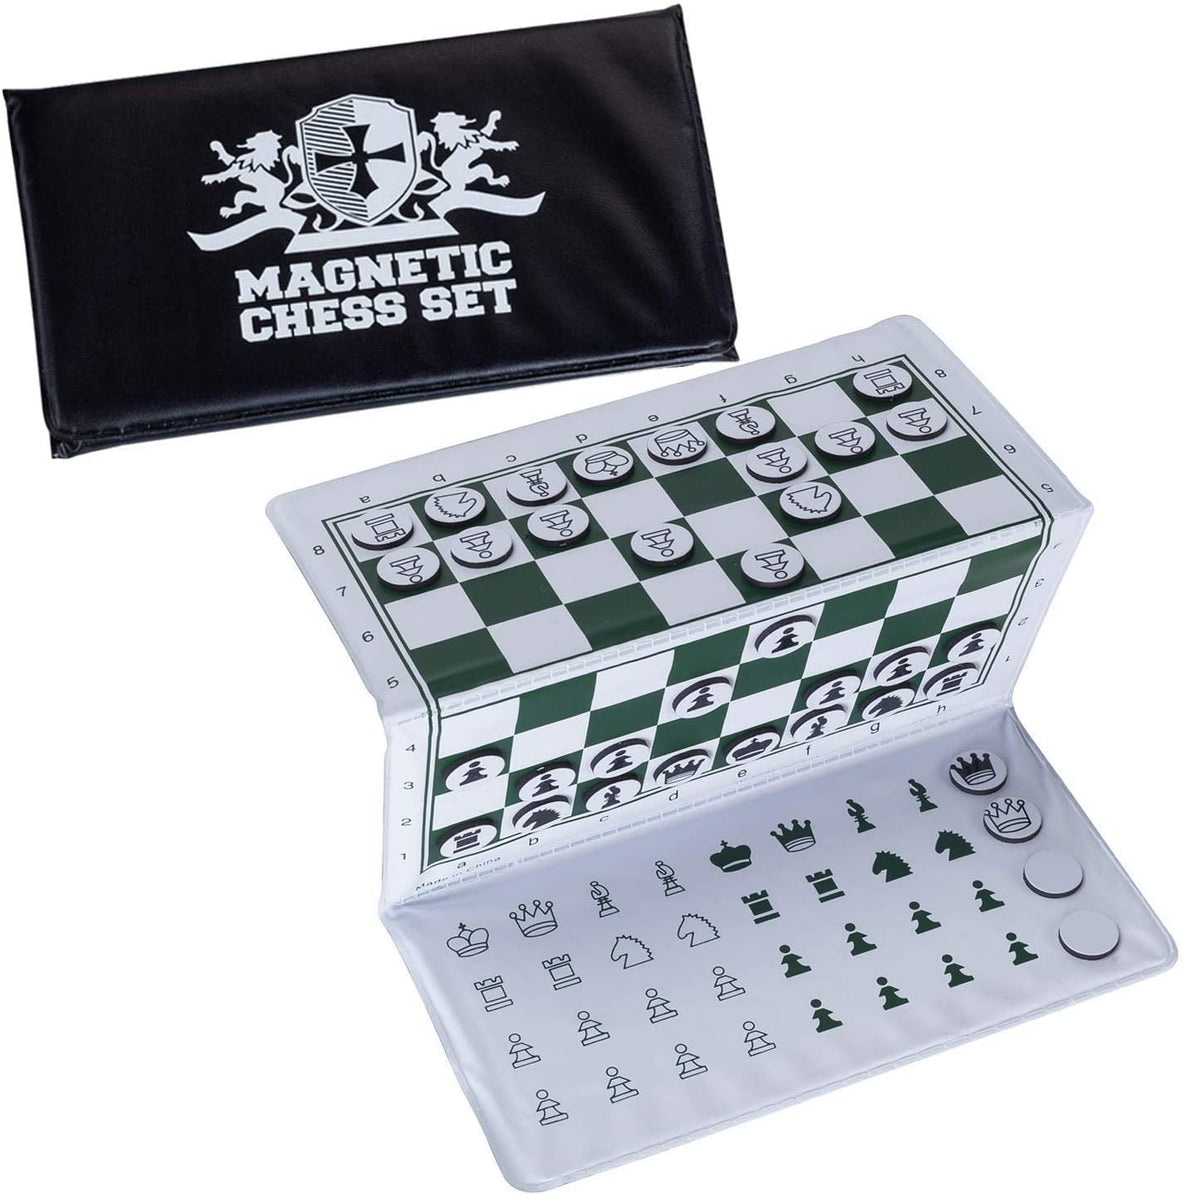 Chess puzzle sticker and magnet. Mate in 3. White to play. | Essential  T-Shirt